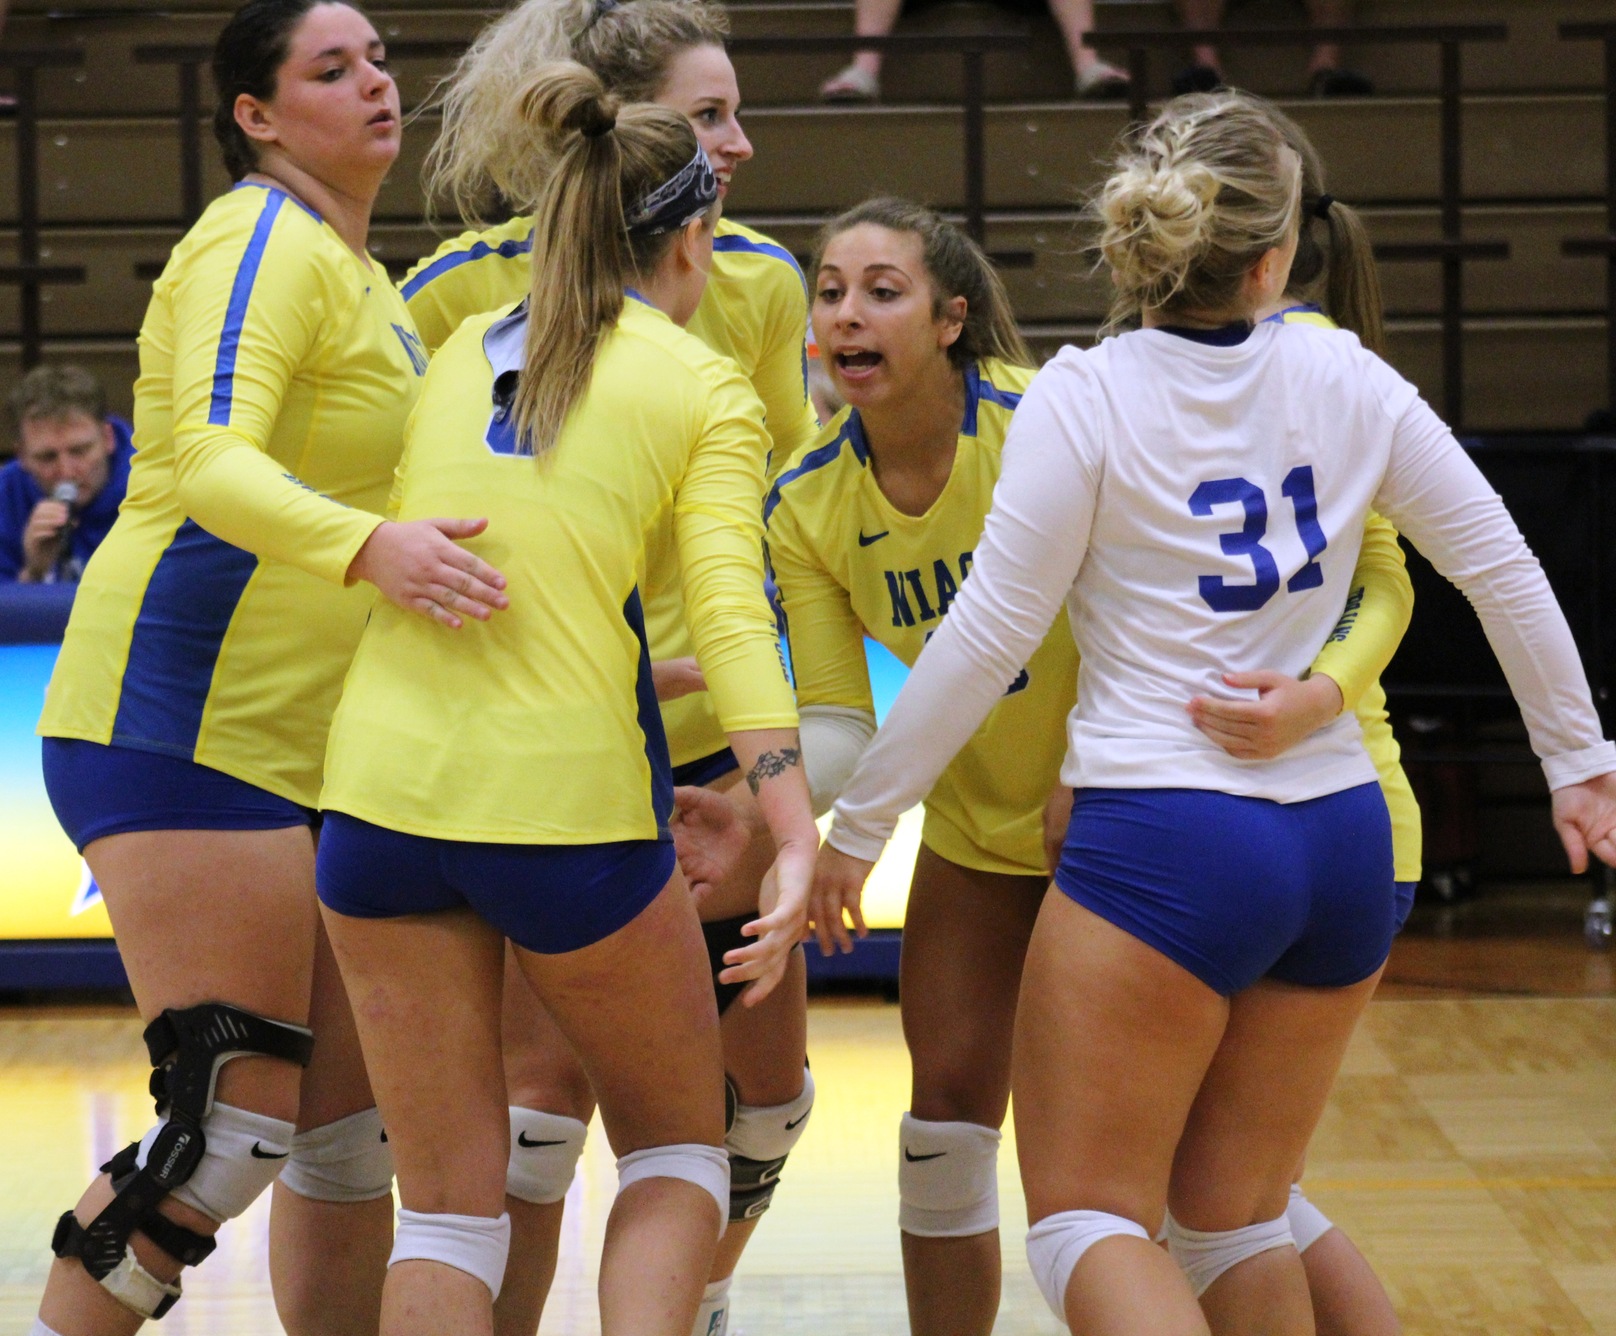 NIACC players celebrate a point in last week's ICCAC home match against DMACC.